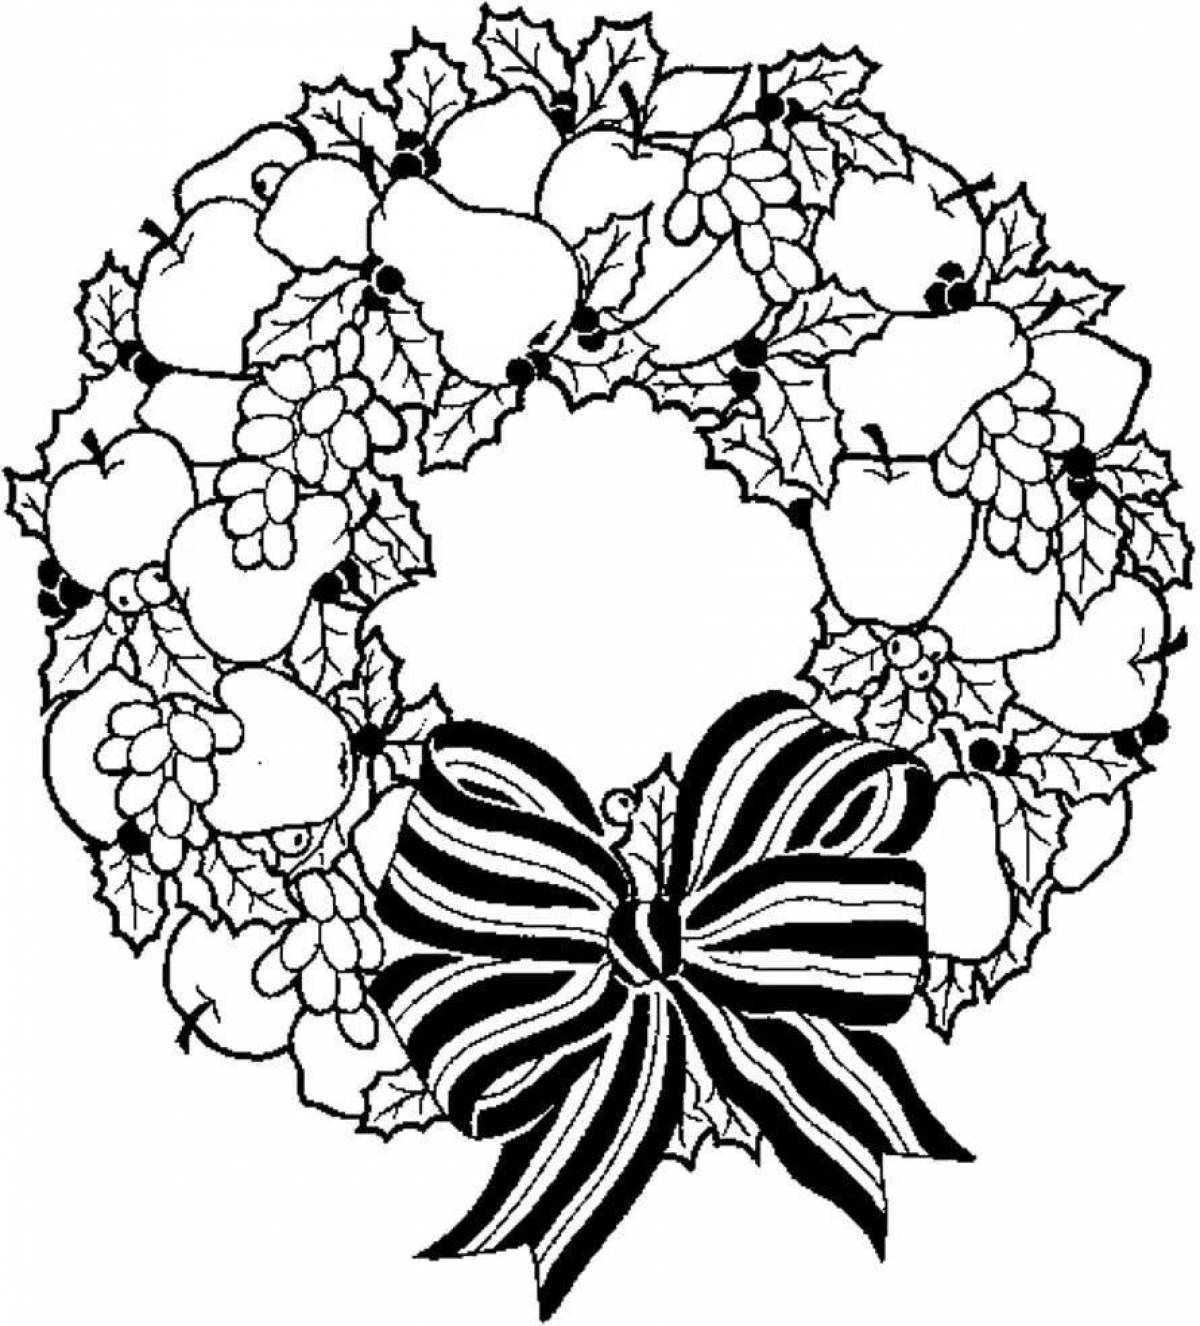 Children's Live Coloring Christmas Wreath